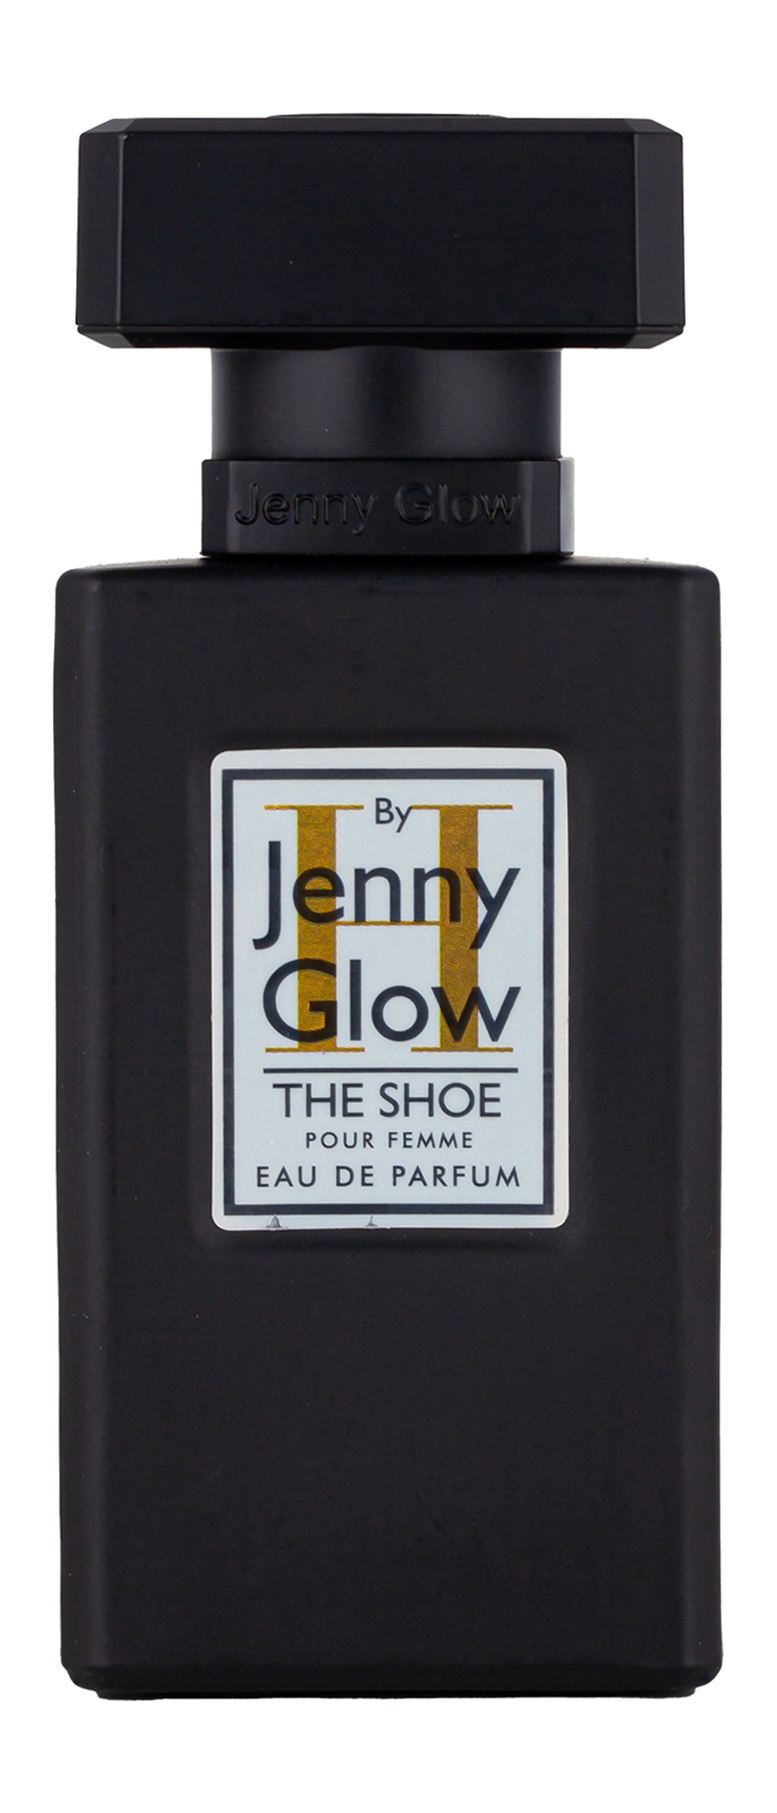 Парфюмерная вода JENNY GLOW H The Shoe Pour Femme 30 мл